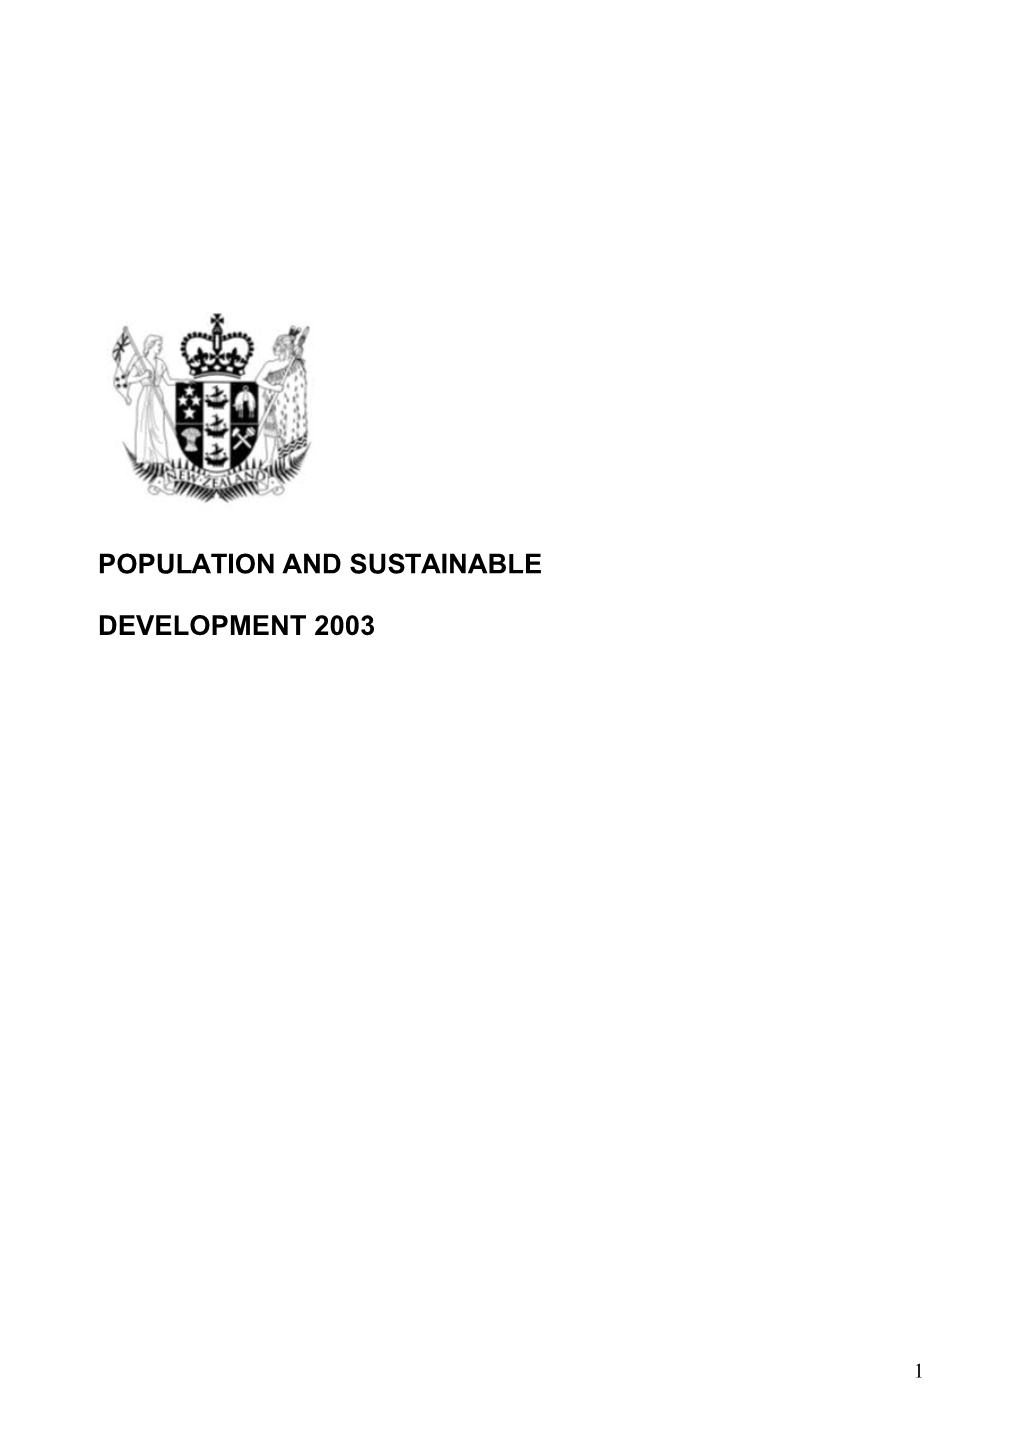 This Report Has Been Prepared As Part of the New Zealand Sustainable Development Strategy